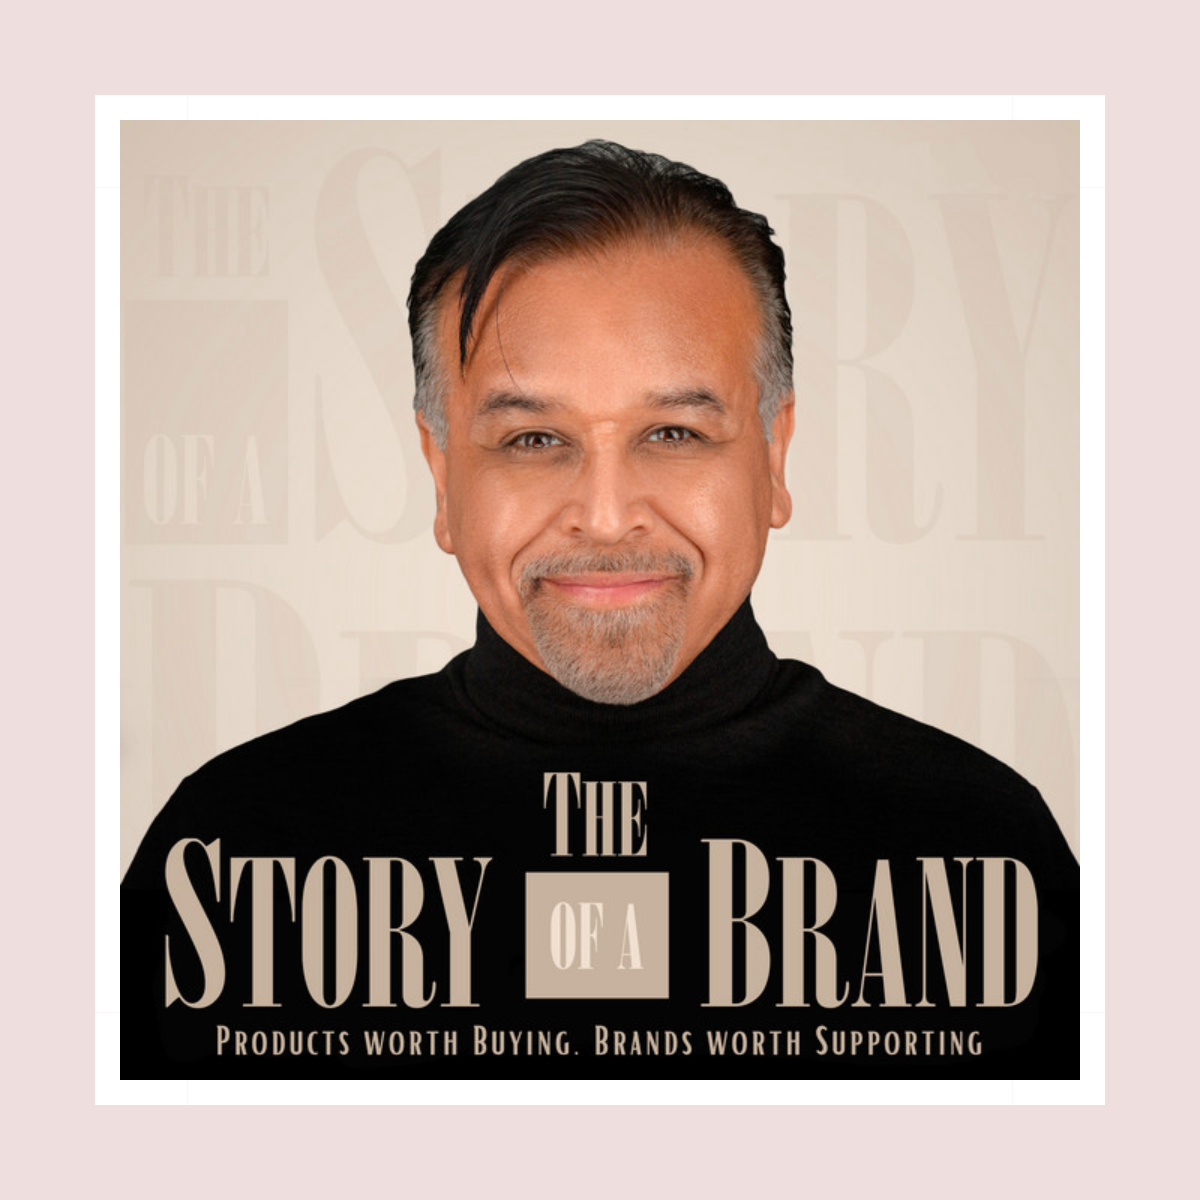 The Story of a Brand podcast brand image.